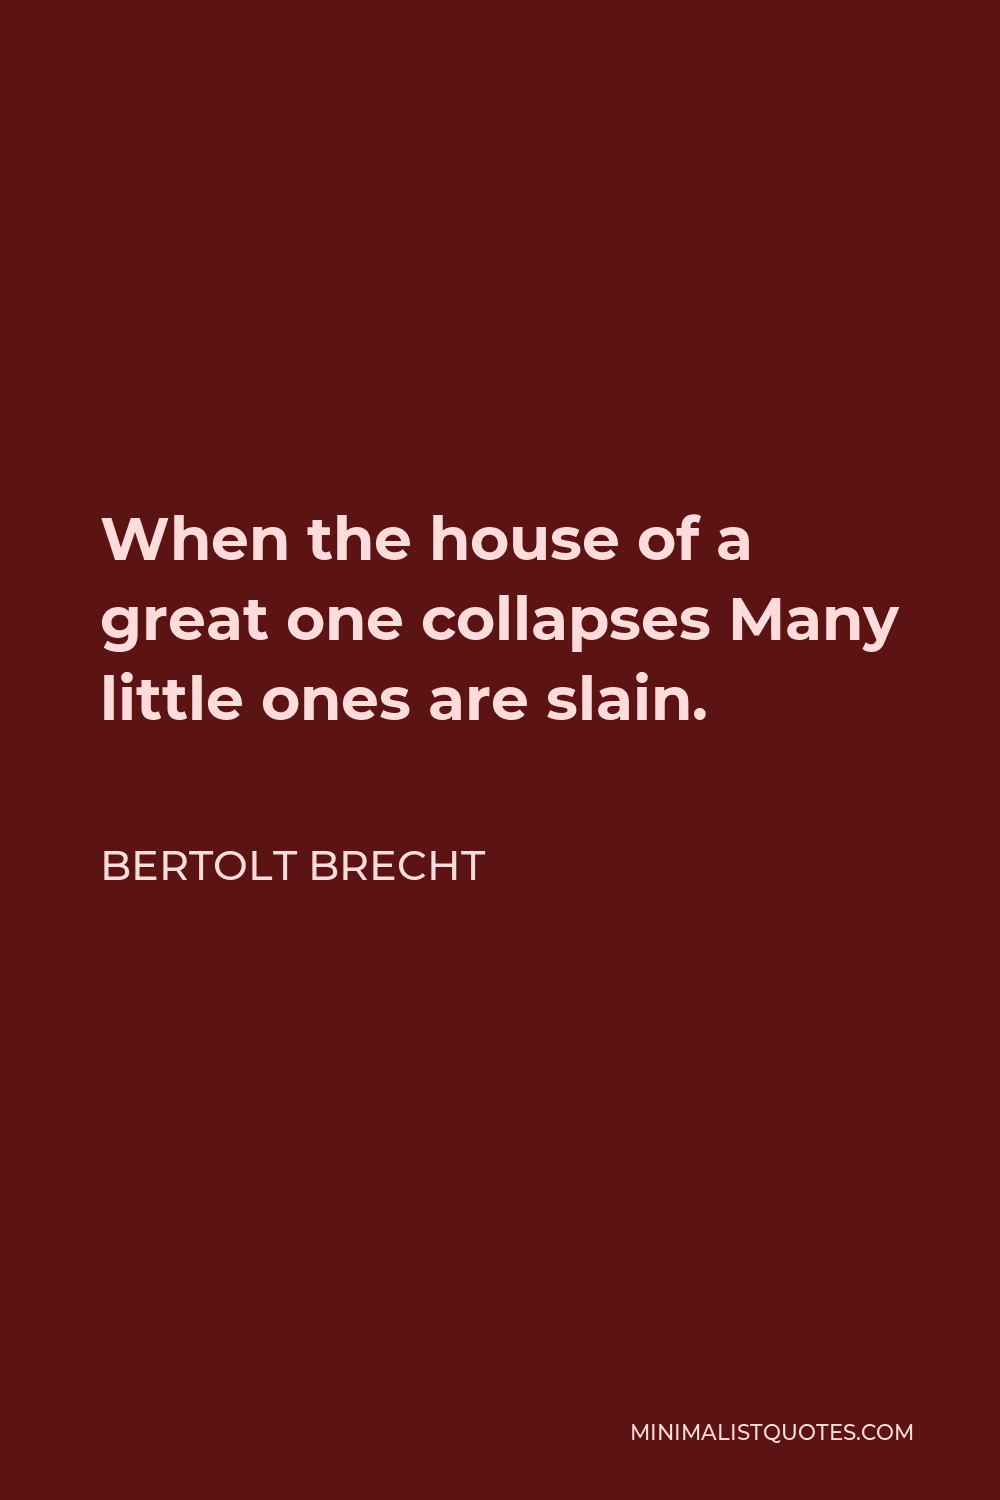 Bertolt Brecht Quote - When the house of a great one collapses Many little ones are slain.